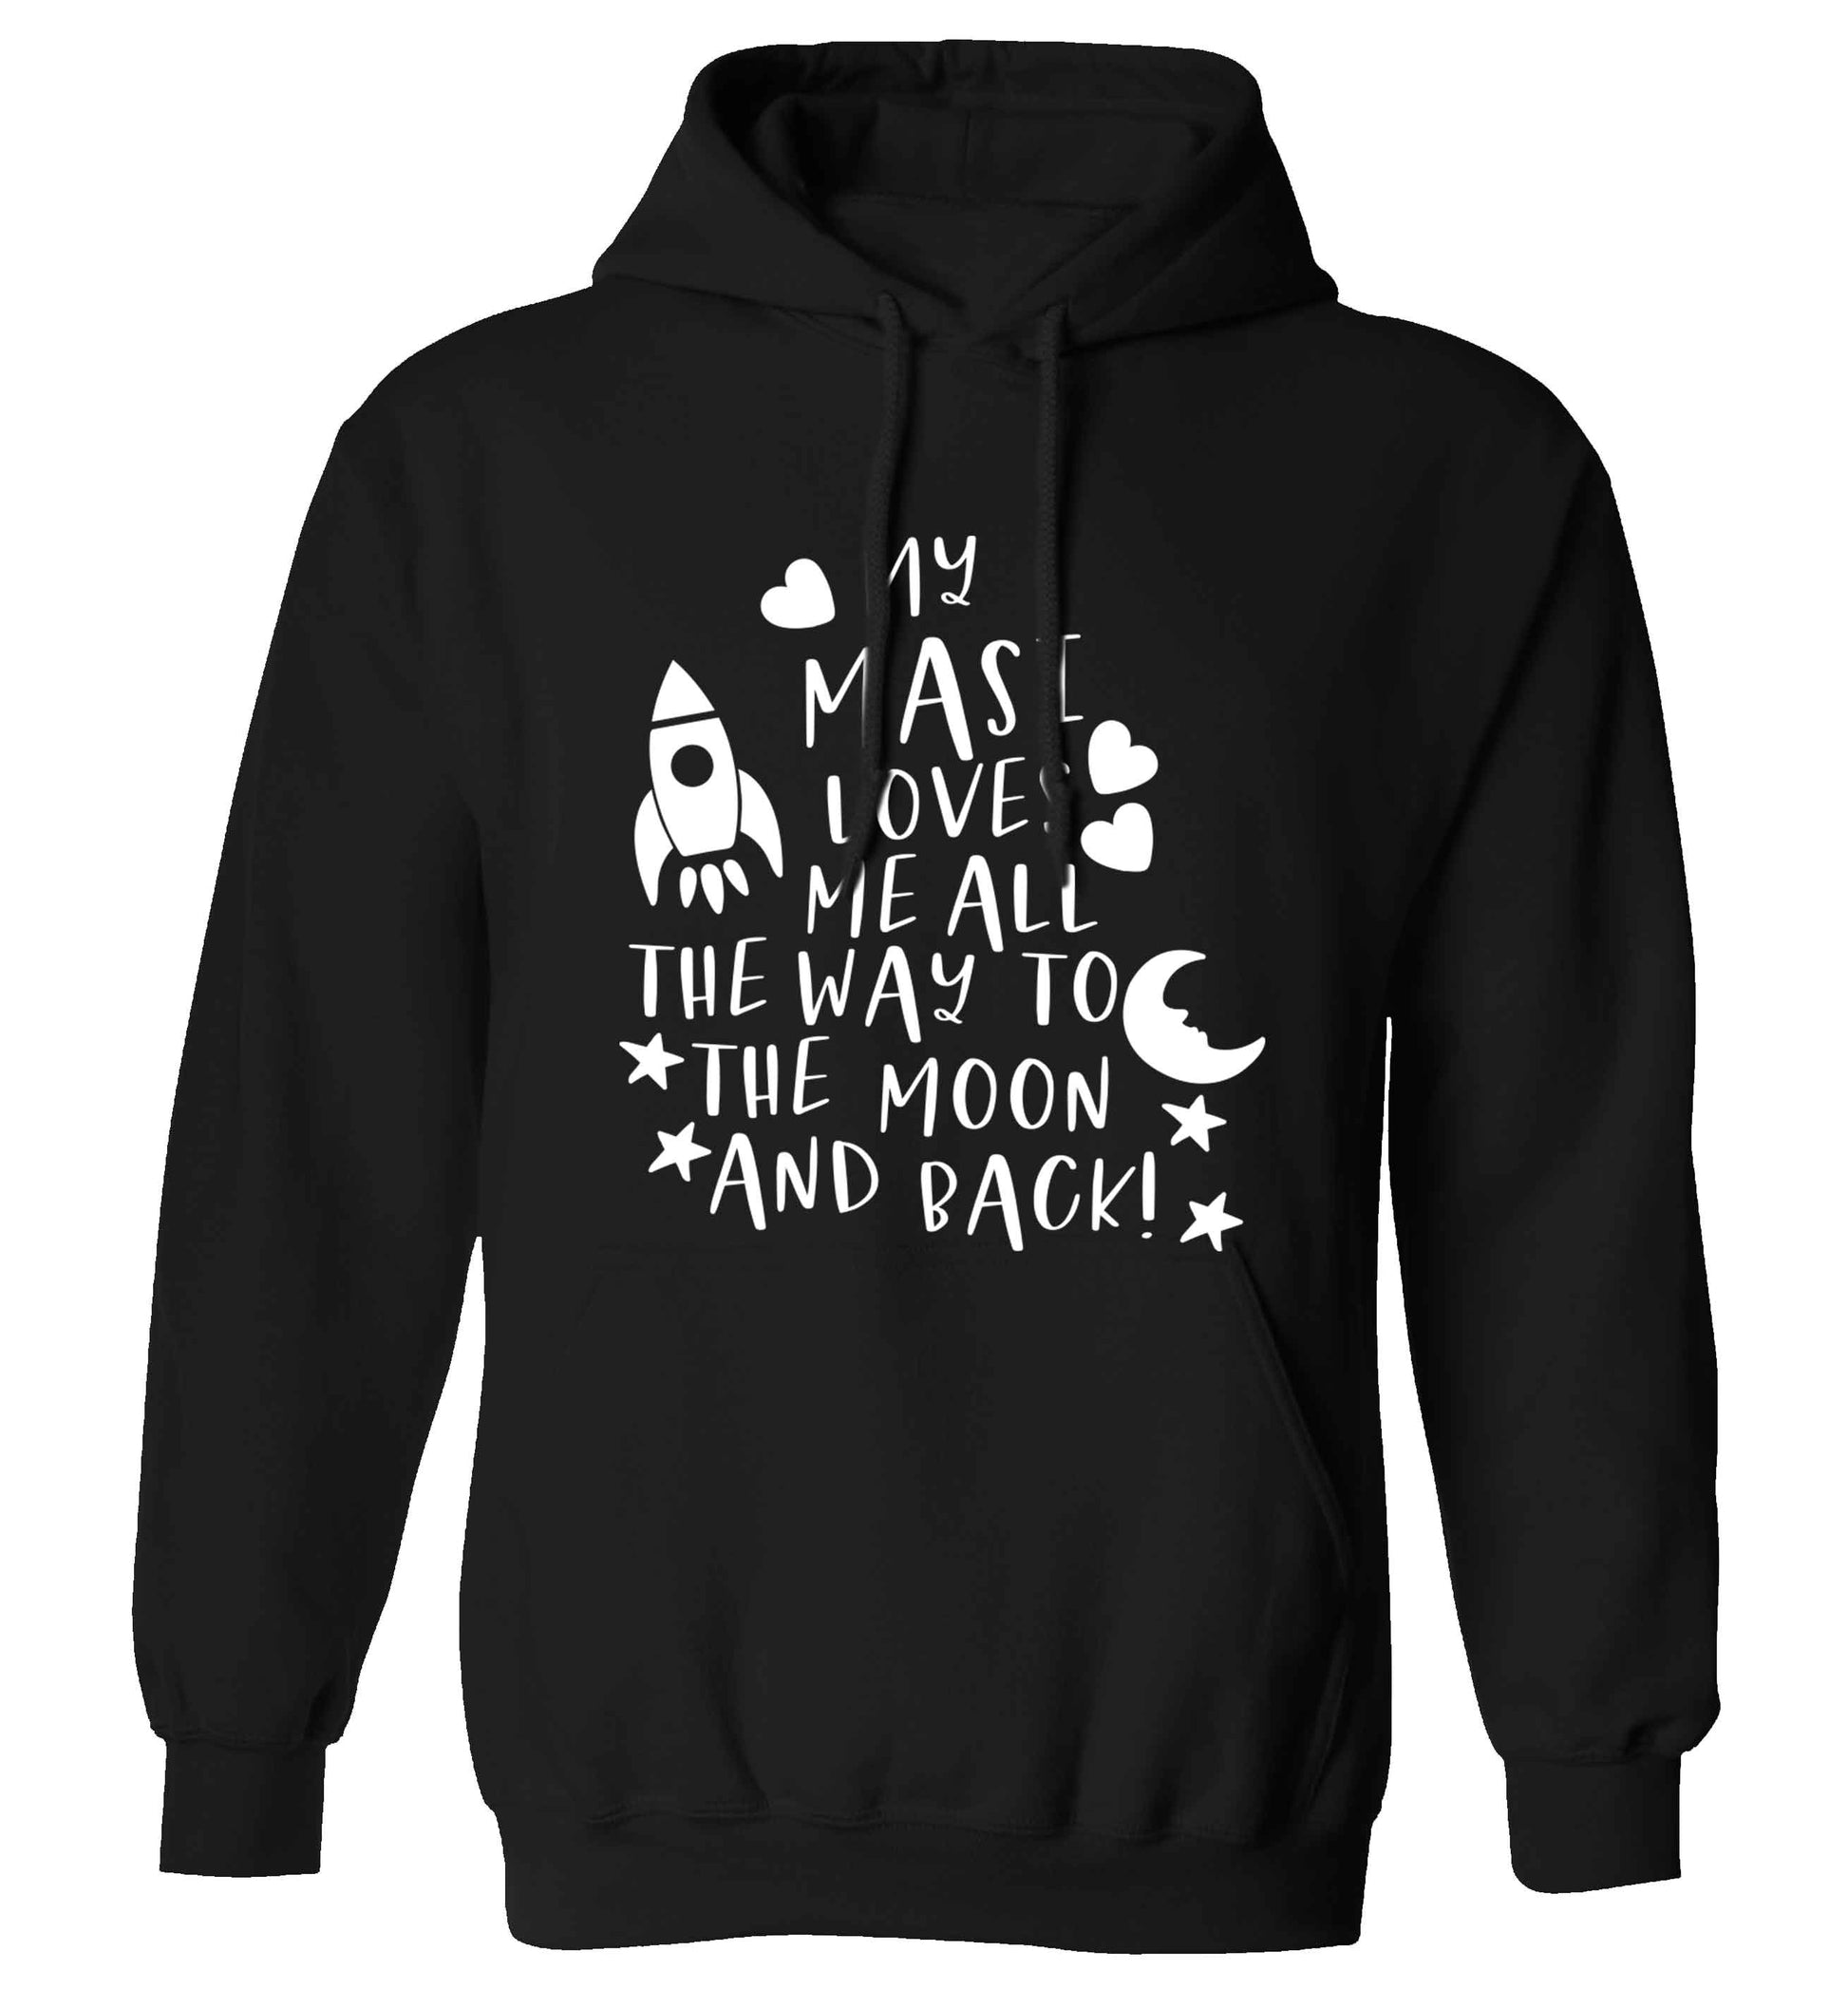 My masi loves me all the way to the moon and back adults unisex black hoodie 2XL